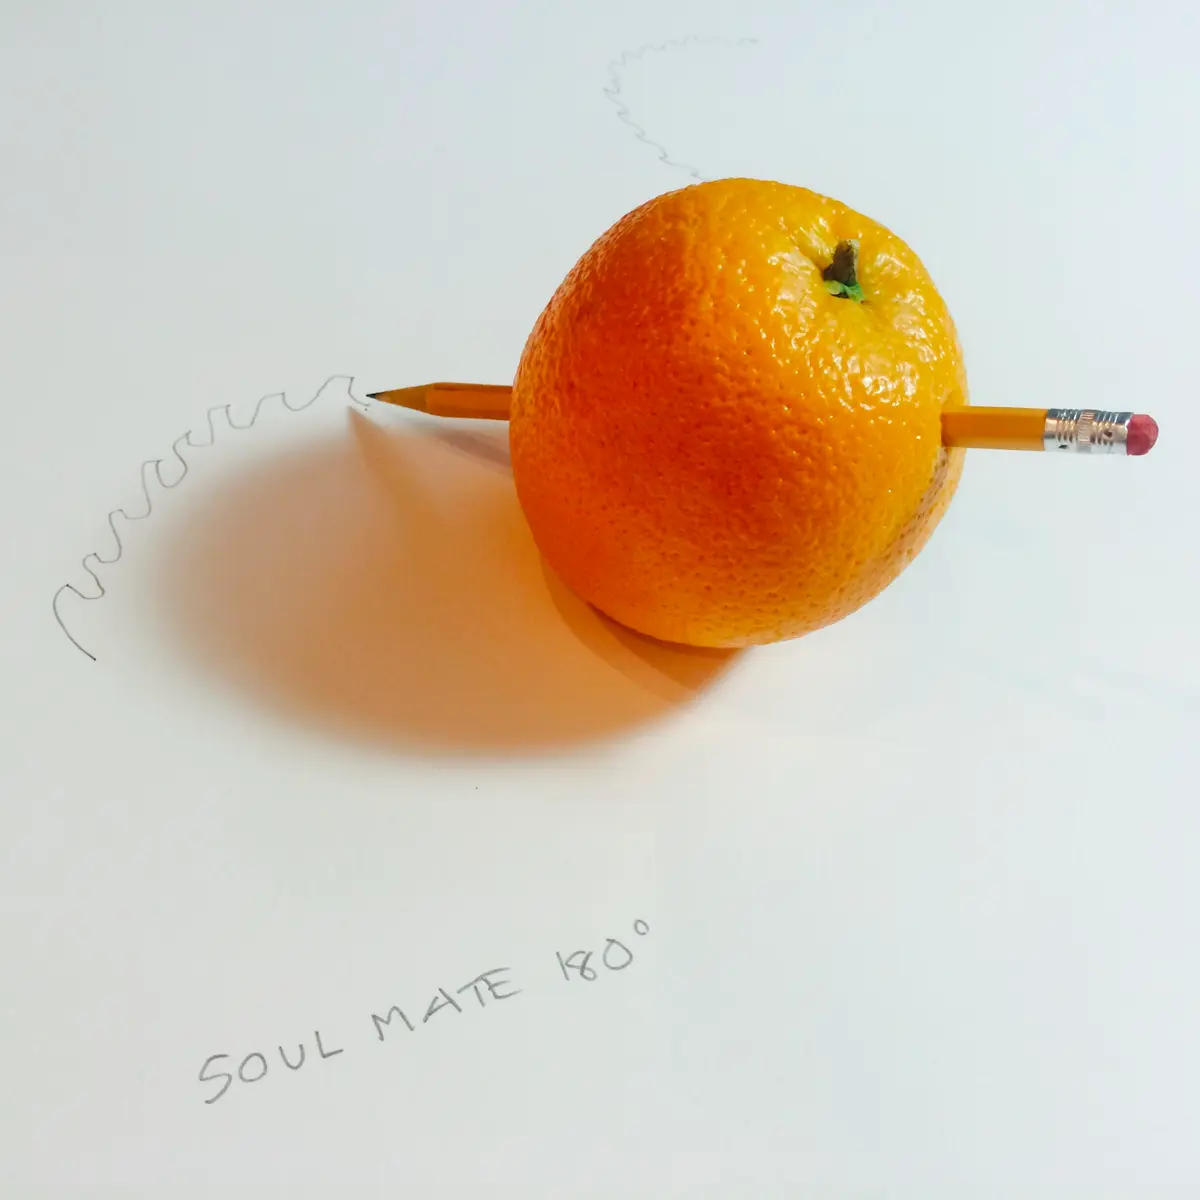 A pencil protruding from an orange, sketching squiggly lines with "soul mate 180°" inscribed nearby.